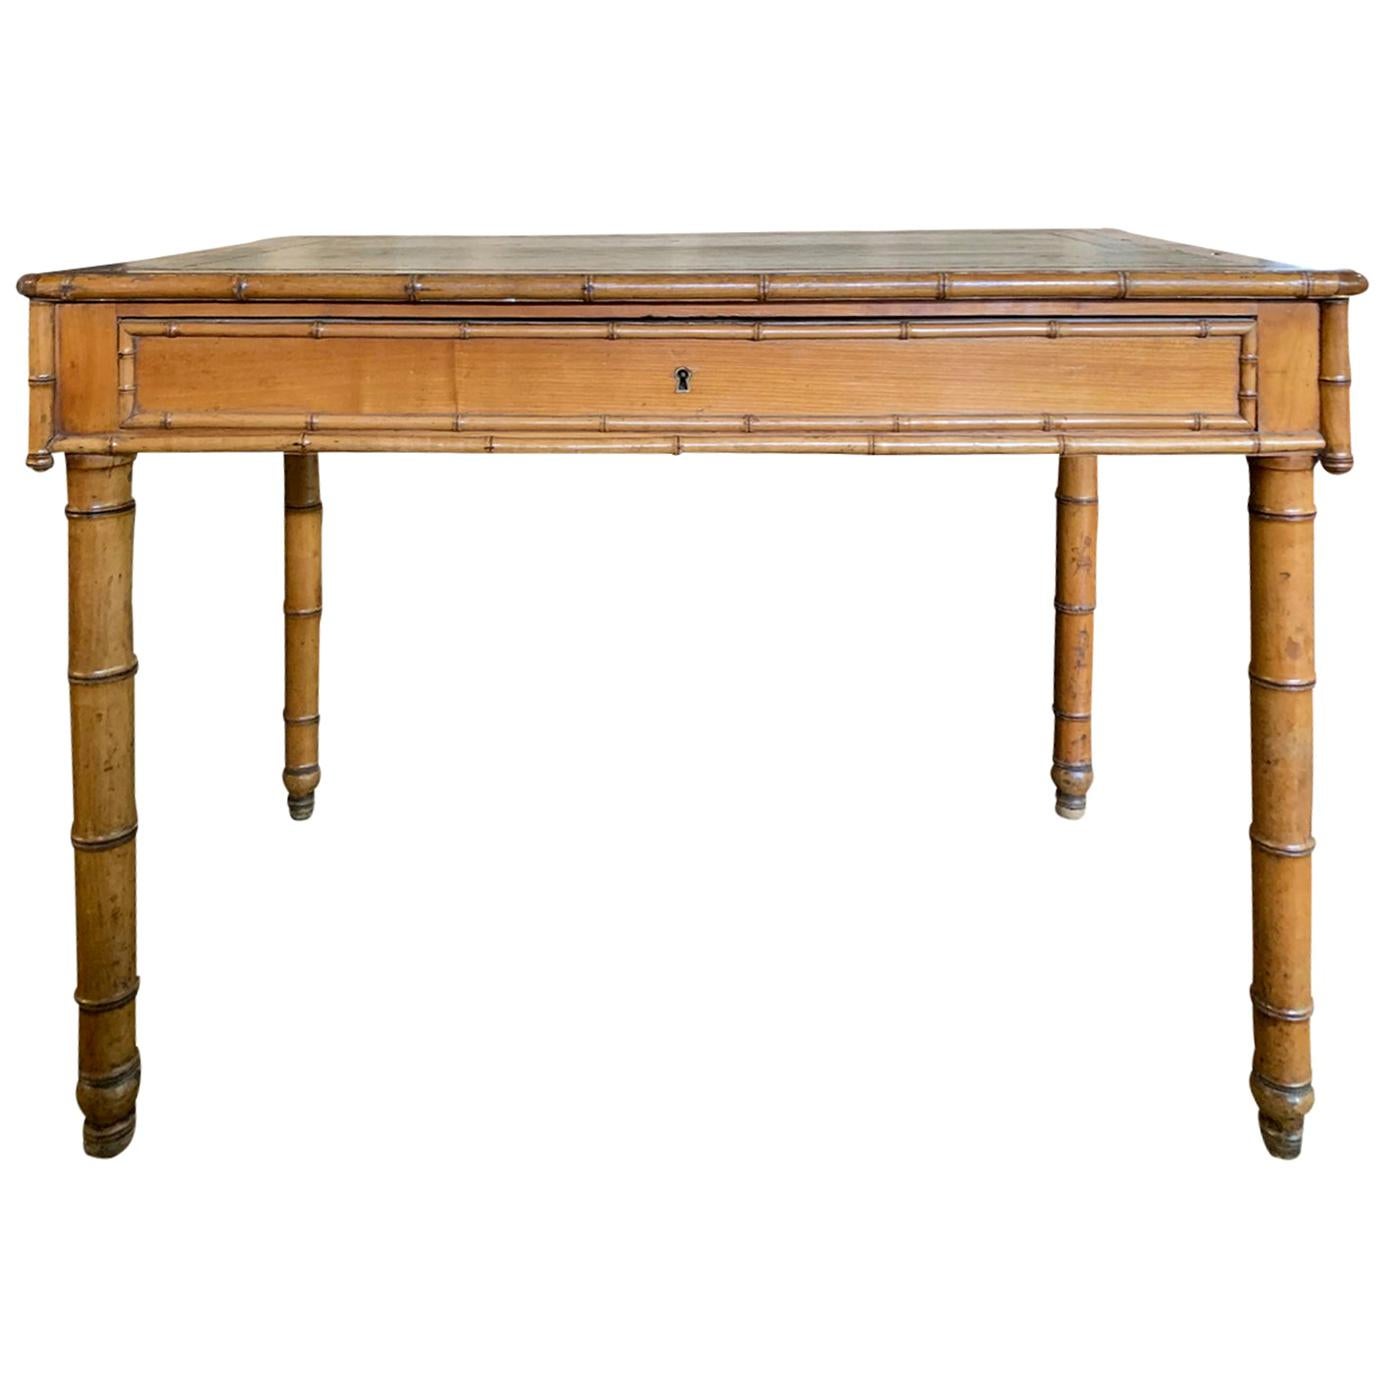 Late 19th-Early 20th Century Regency Style Turned Bamboo Leather Top Desk